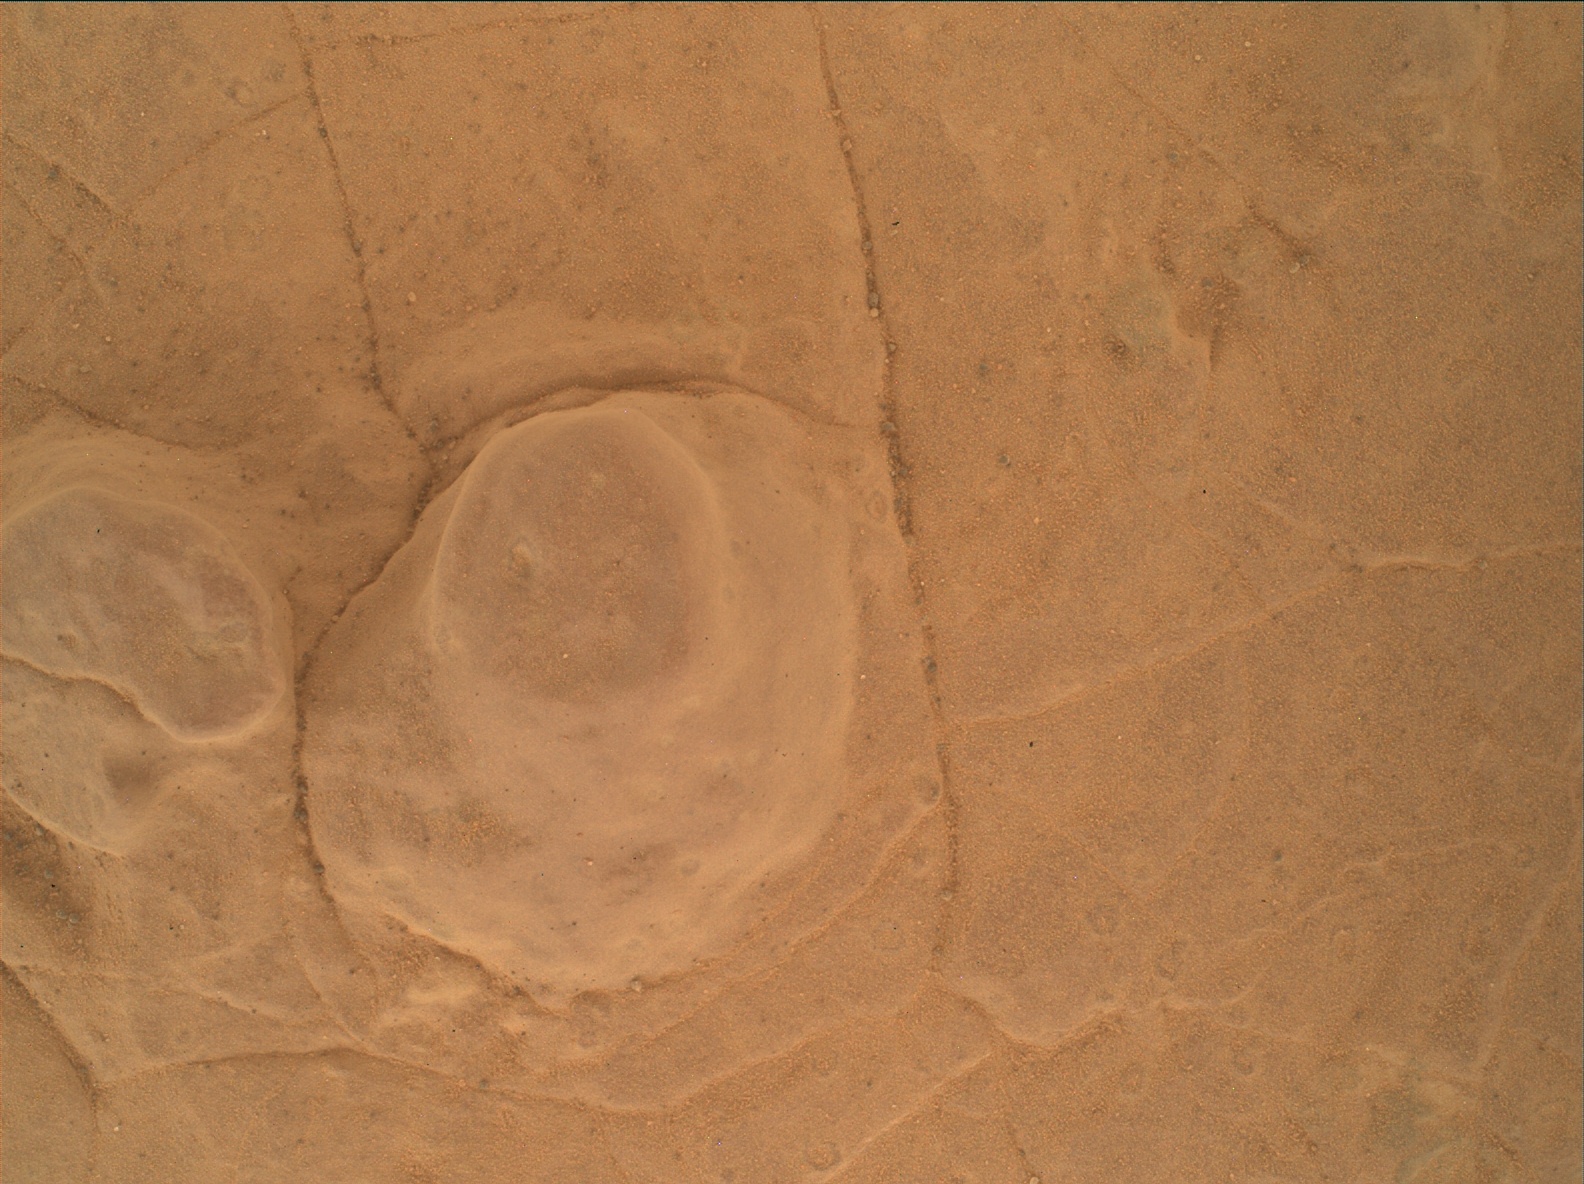 Nasa's Mars rover Curiosity acquired this image using its Mars Hand Lens Imager (MAHLI) on Sol 2974